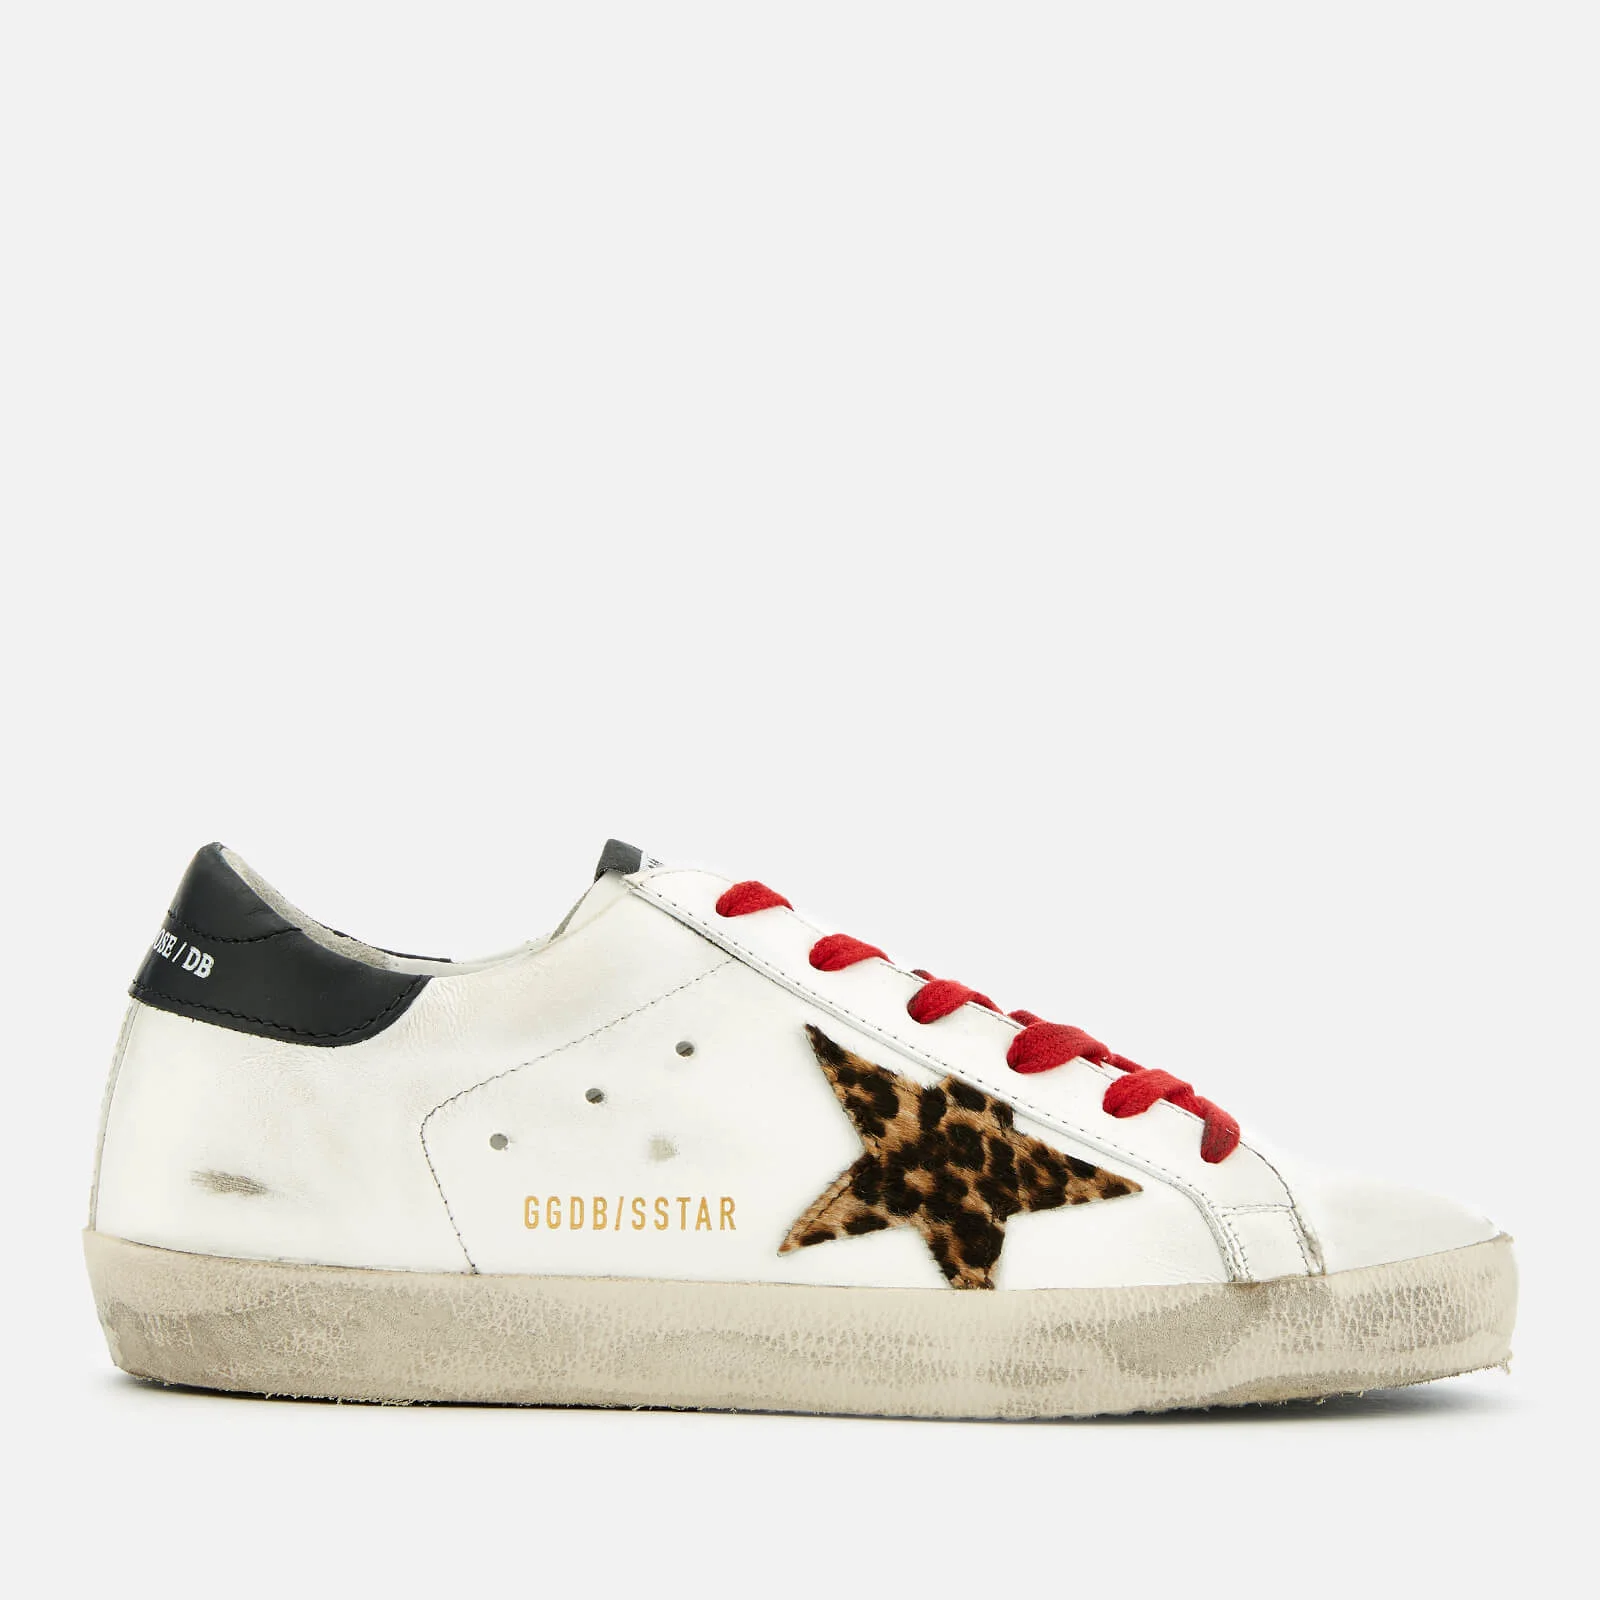 Golden Goose Women's Superstar Leather Trainers - White/Black/Animalier Image 1